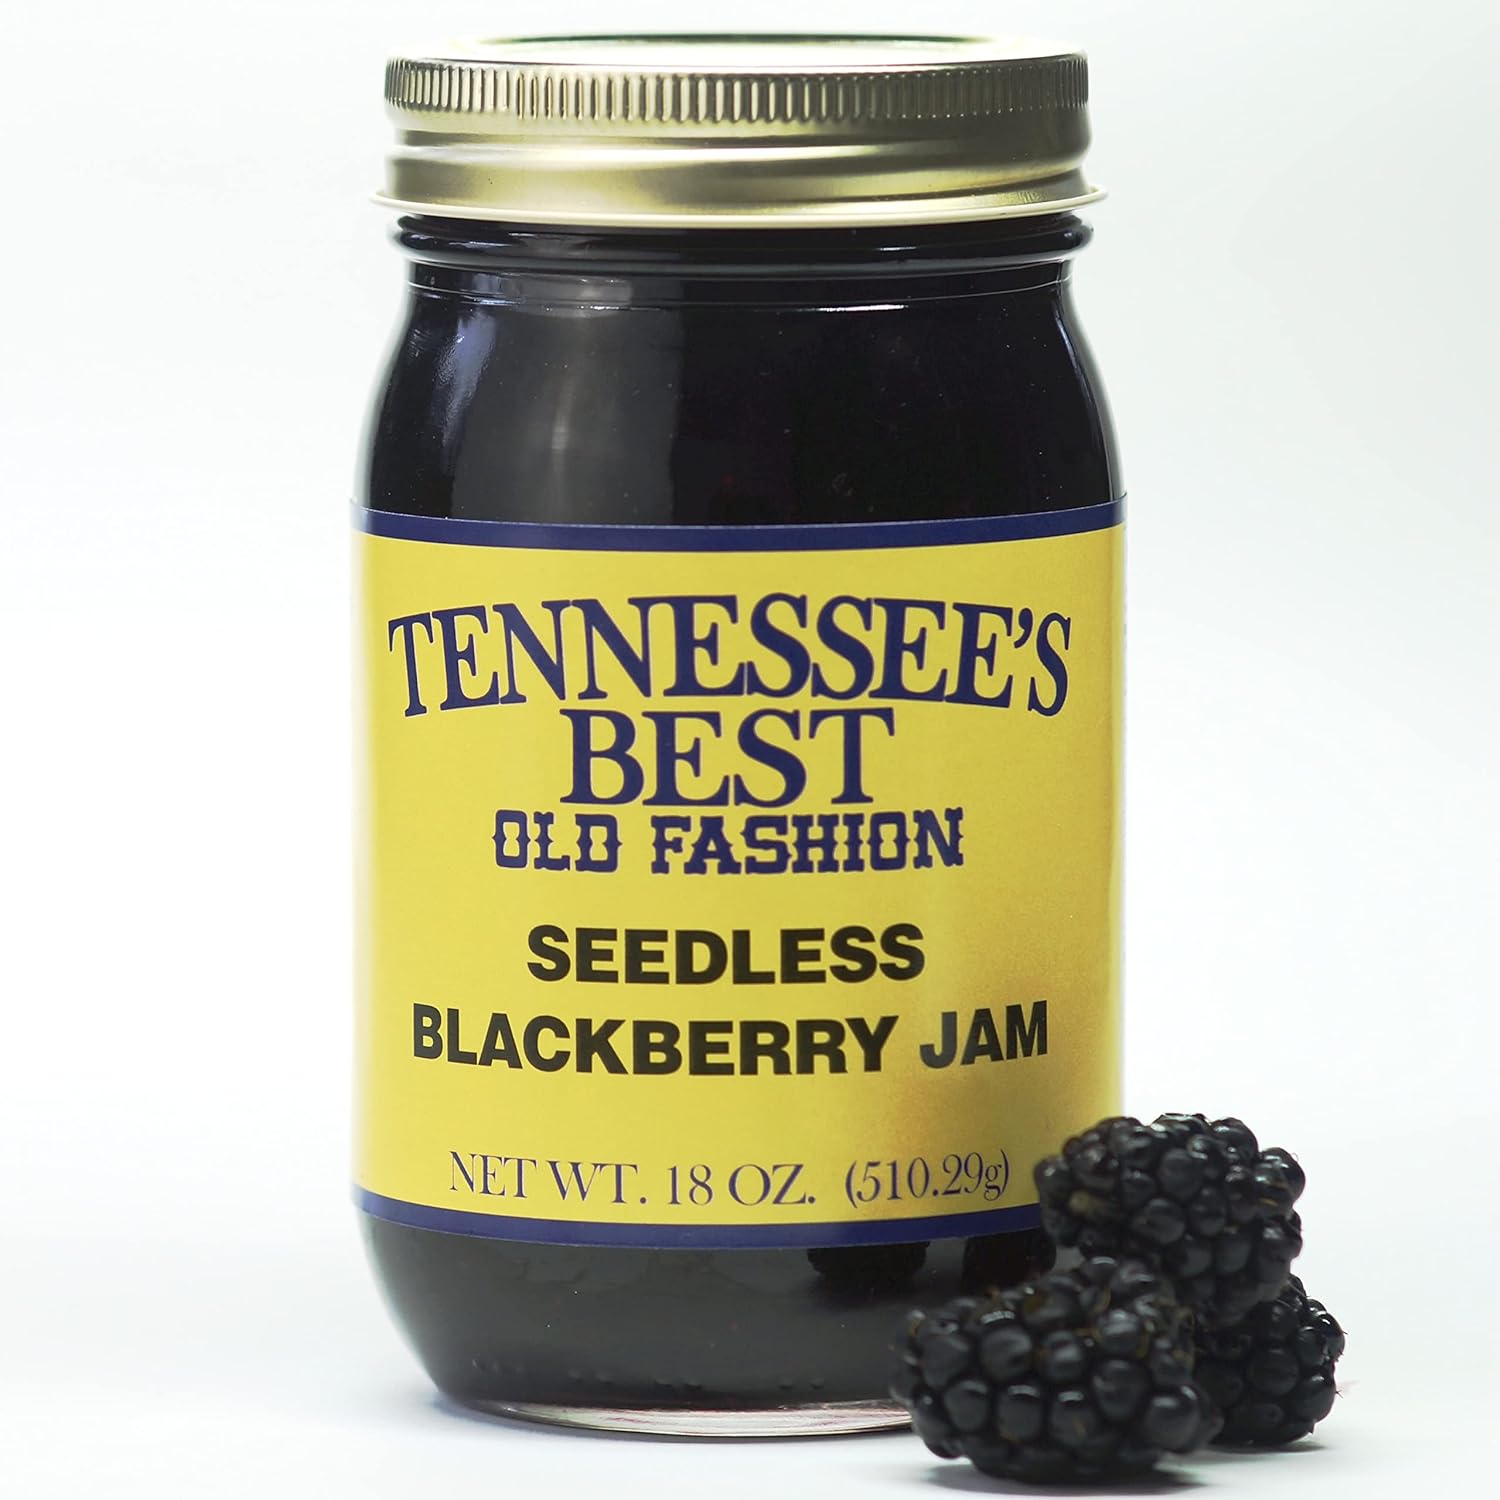 Tennessee’s Best Old Fashion Style Seedless Blackberry Jam | Handcrafted With Simple Ingredients | Small Batch Made- 18 Oz Resealable Glass Jar (Seedless…